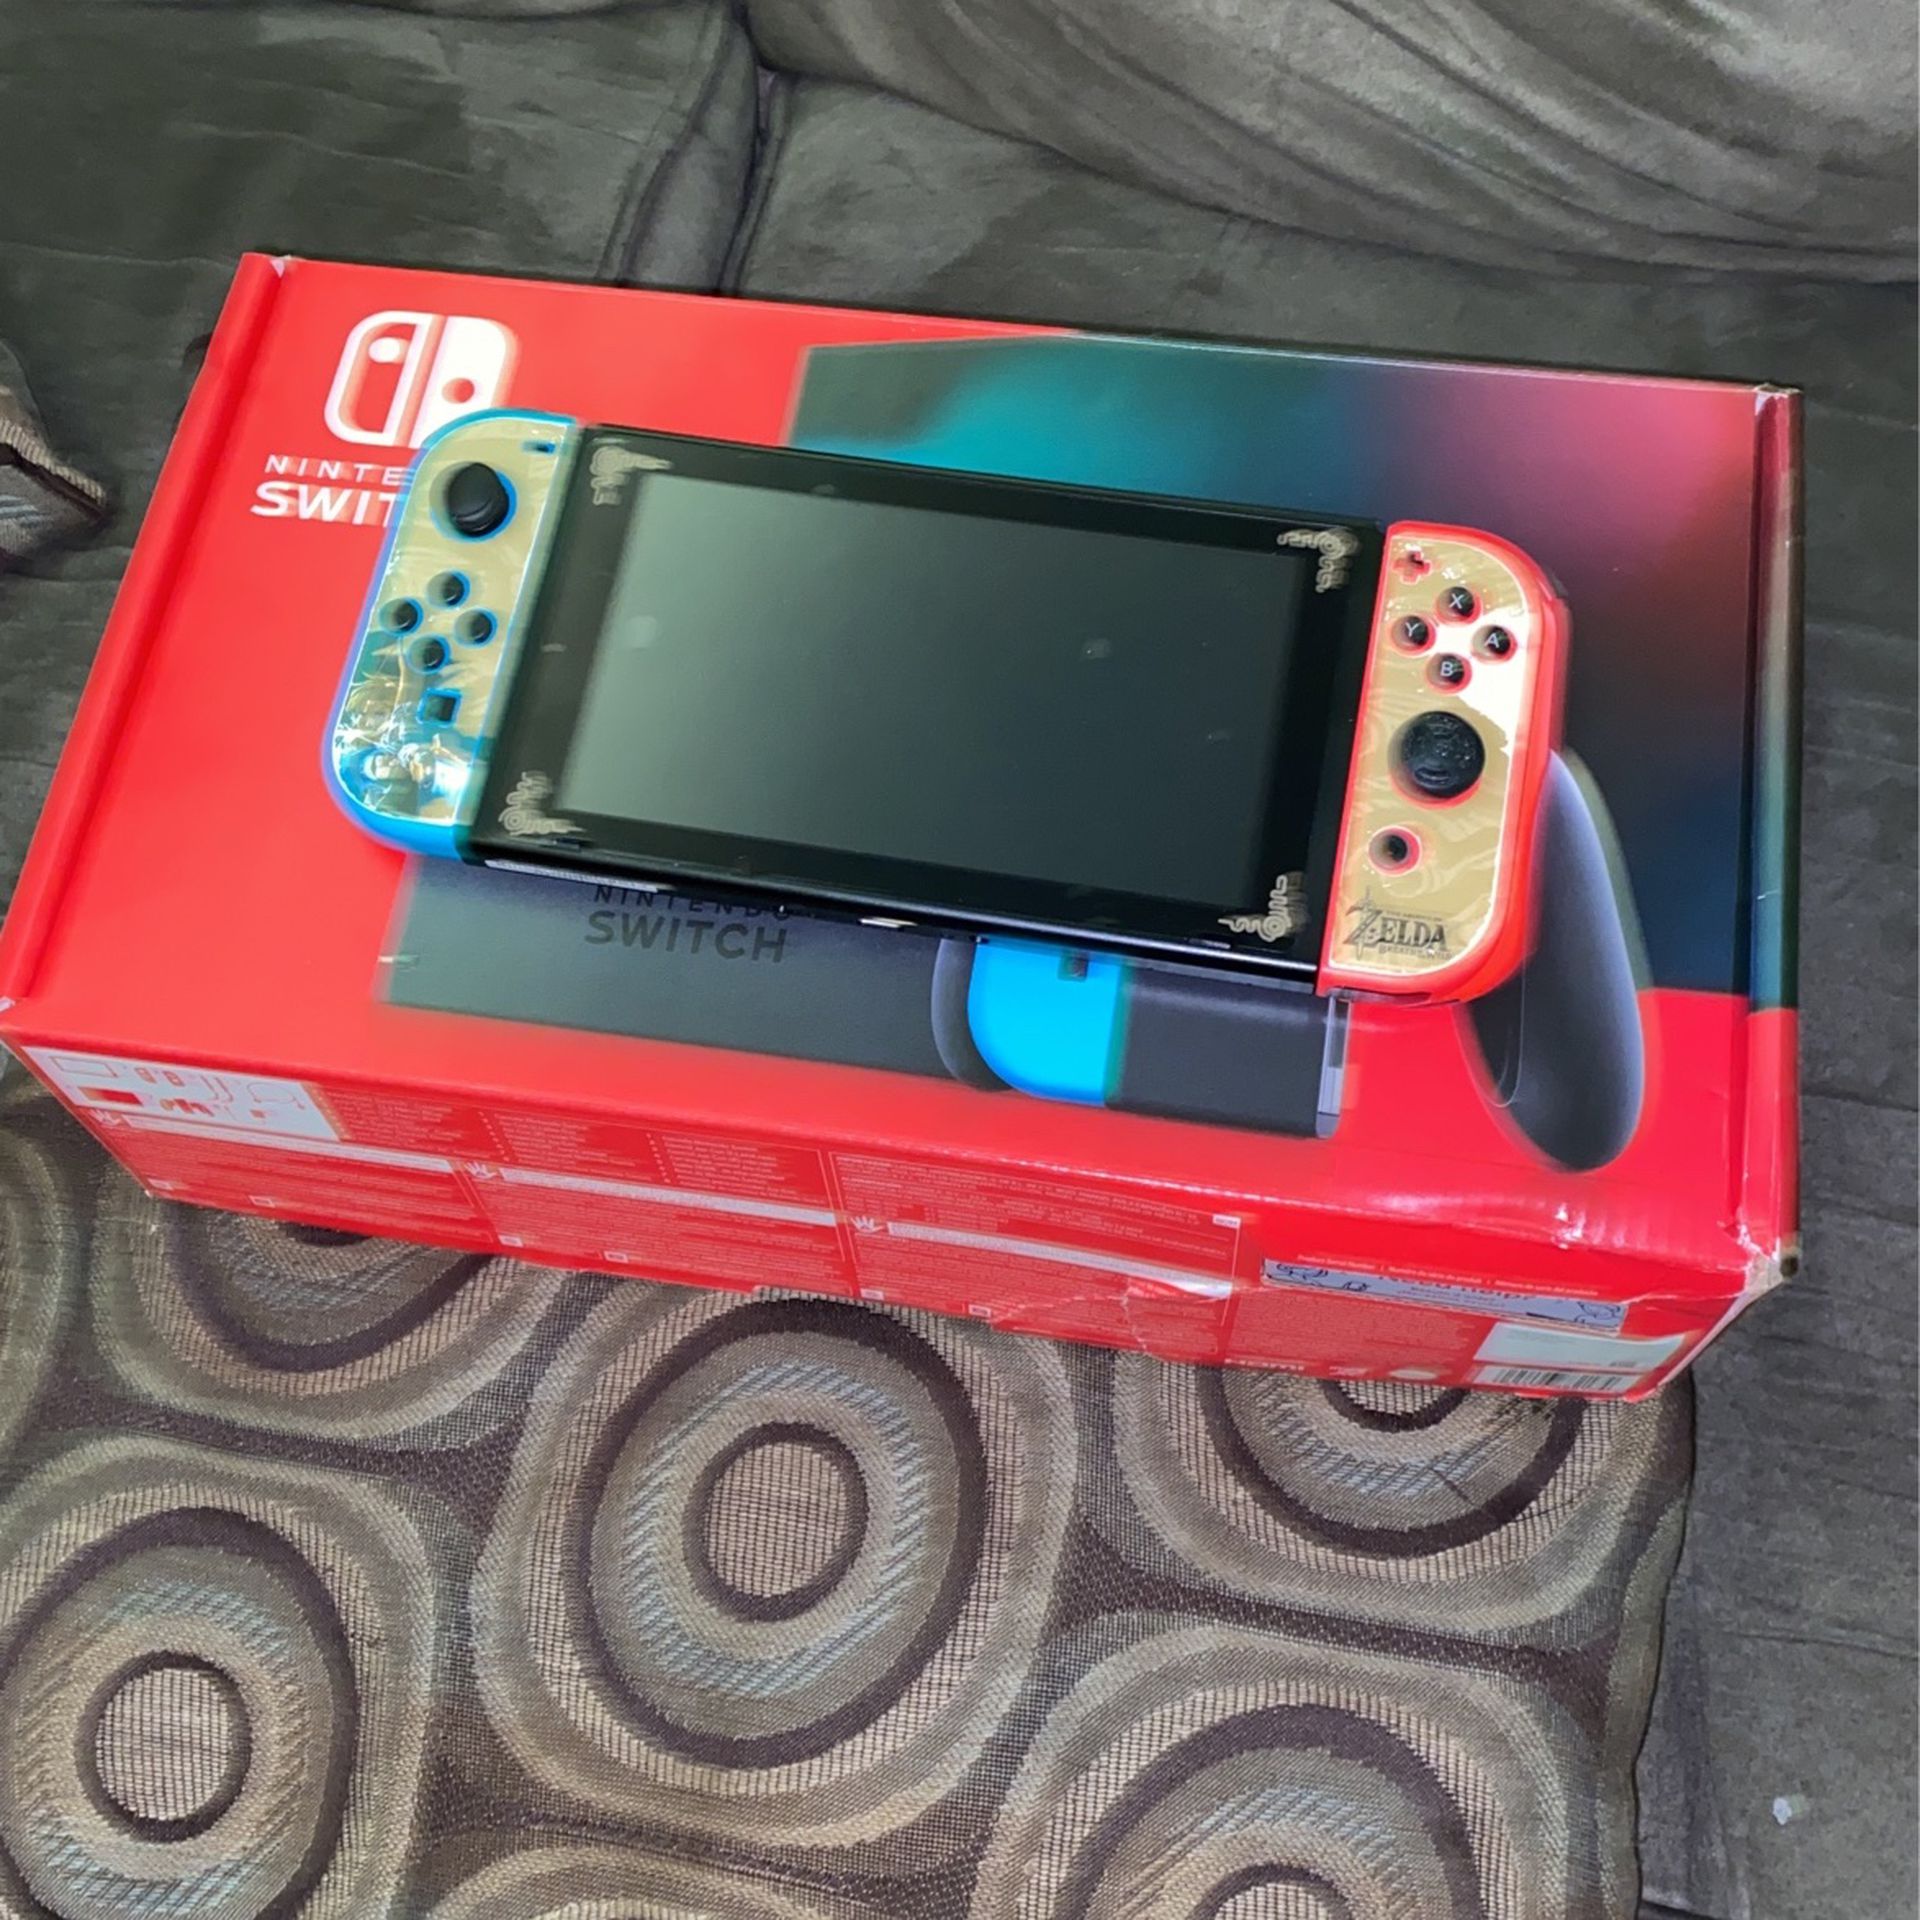 Nintendo Switch Full (With Zelda Cover)